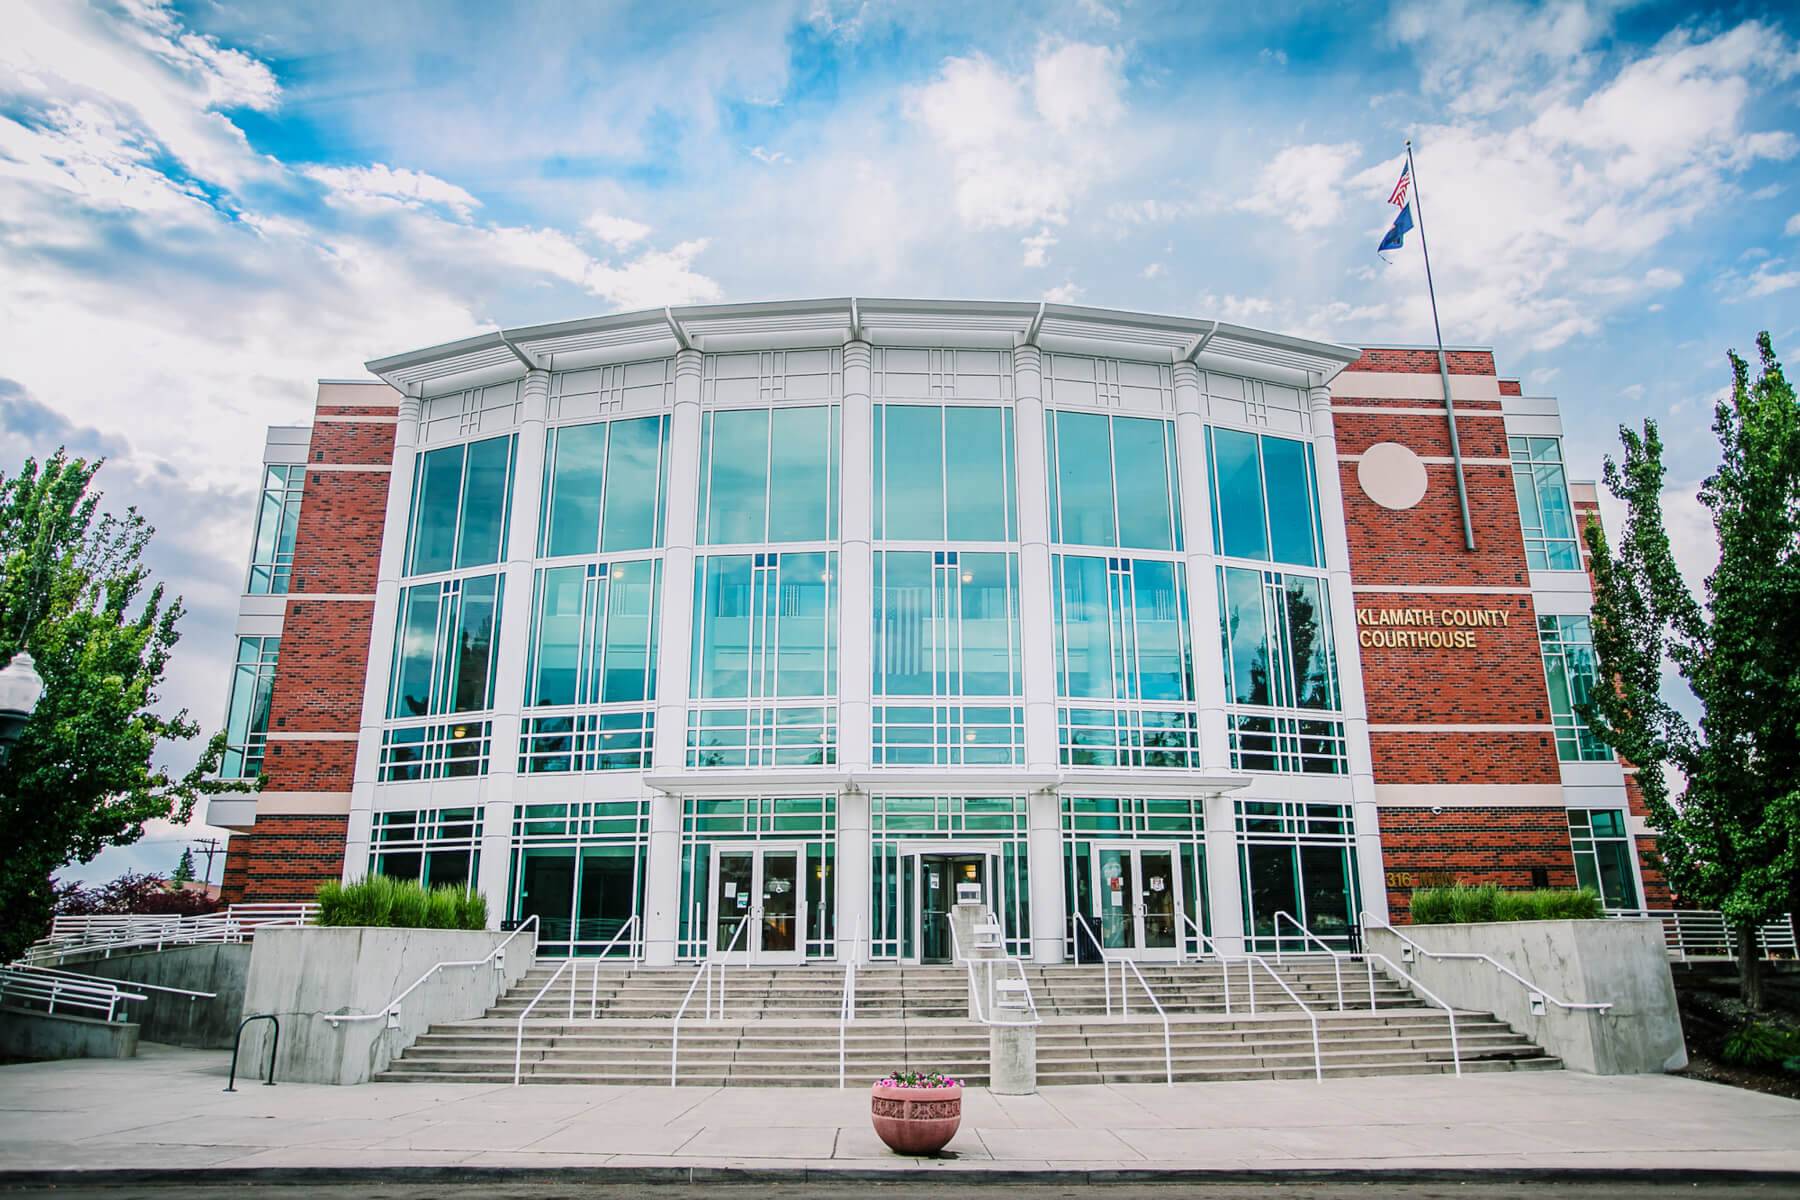 Image of the Klamath County Courthouse Building, designed by architect Jeff Finsand.